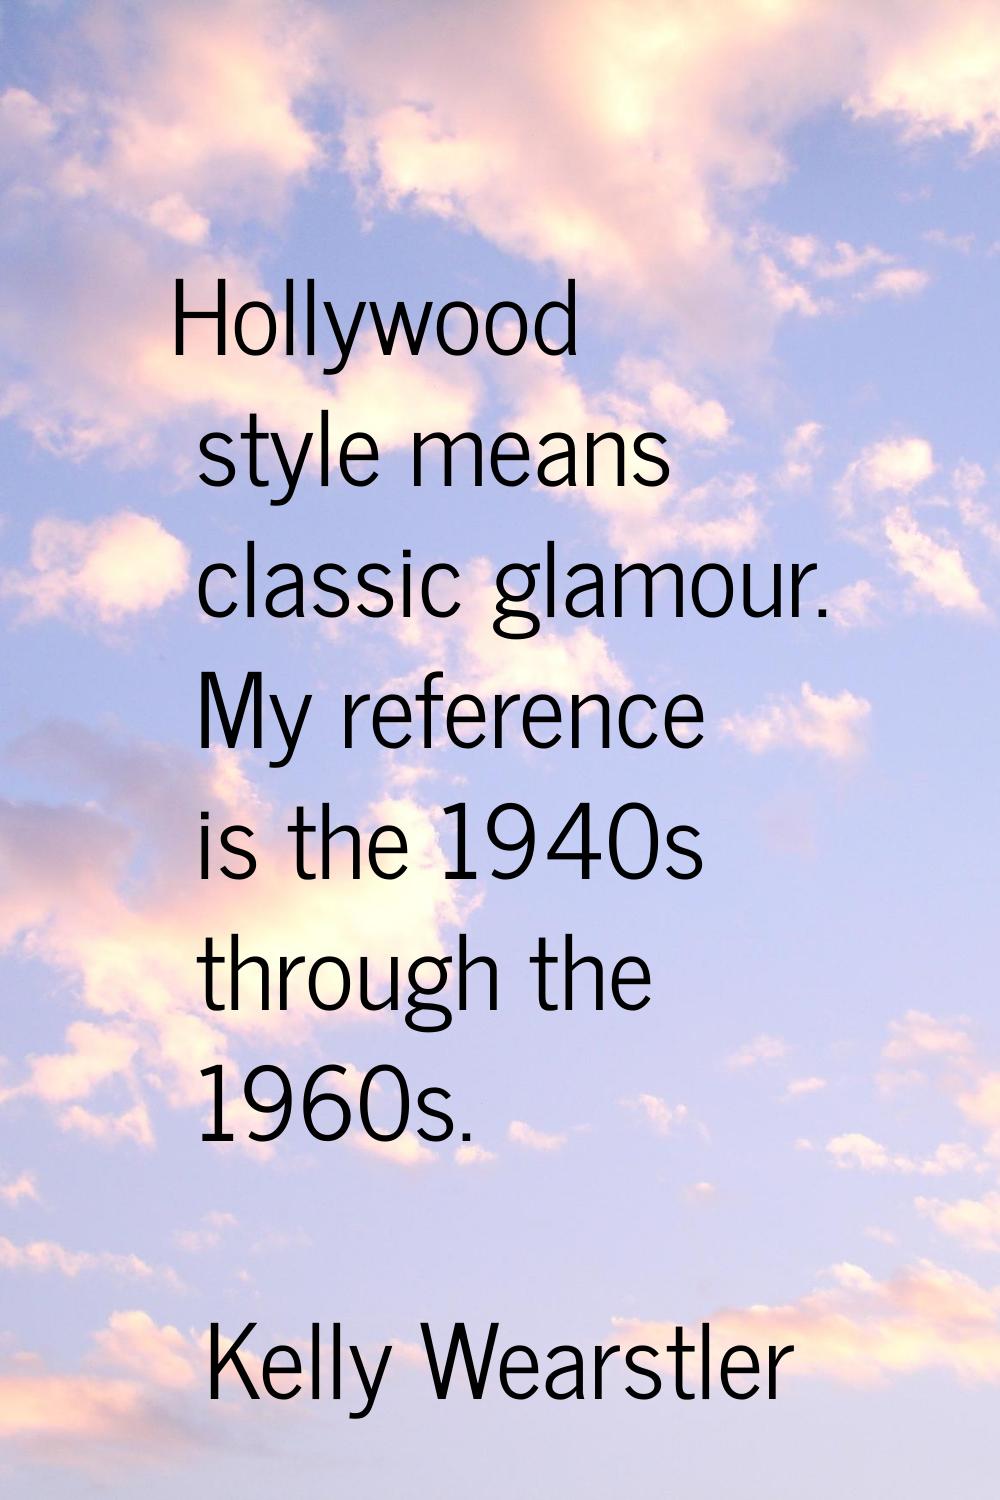 Hollywood style means classic glamour. My reference is the 1940s through the 1960s.